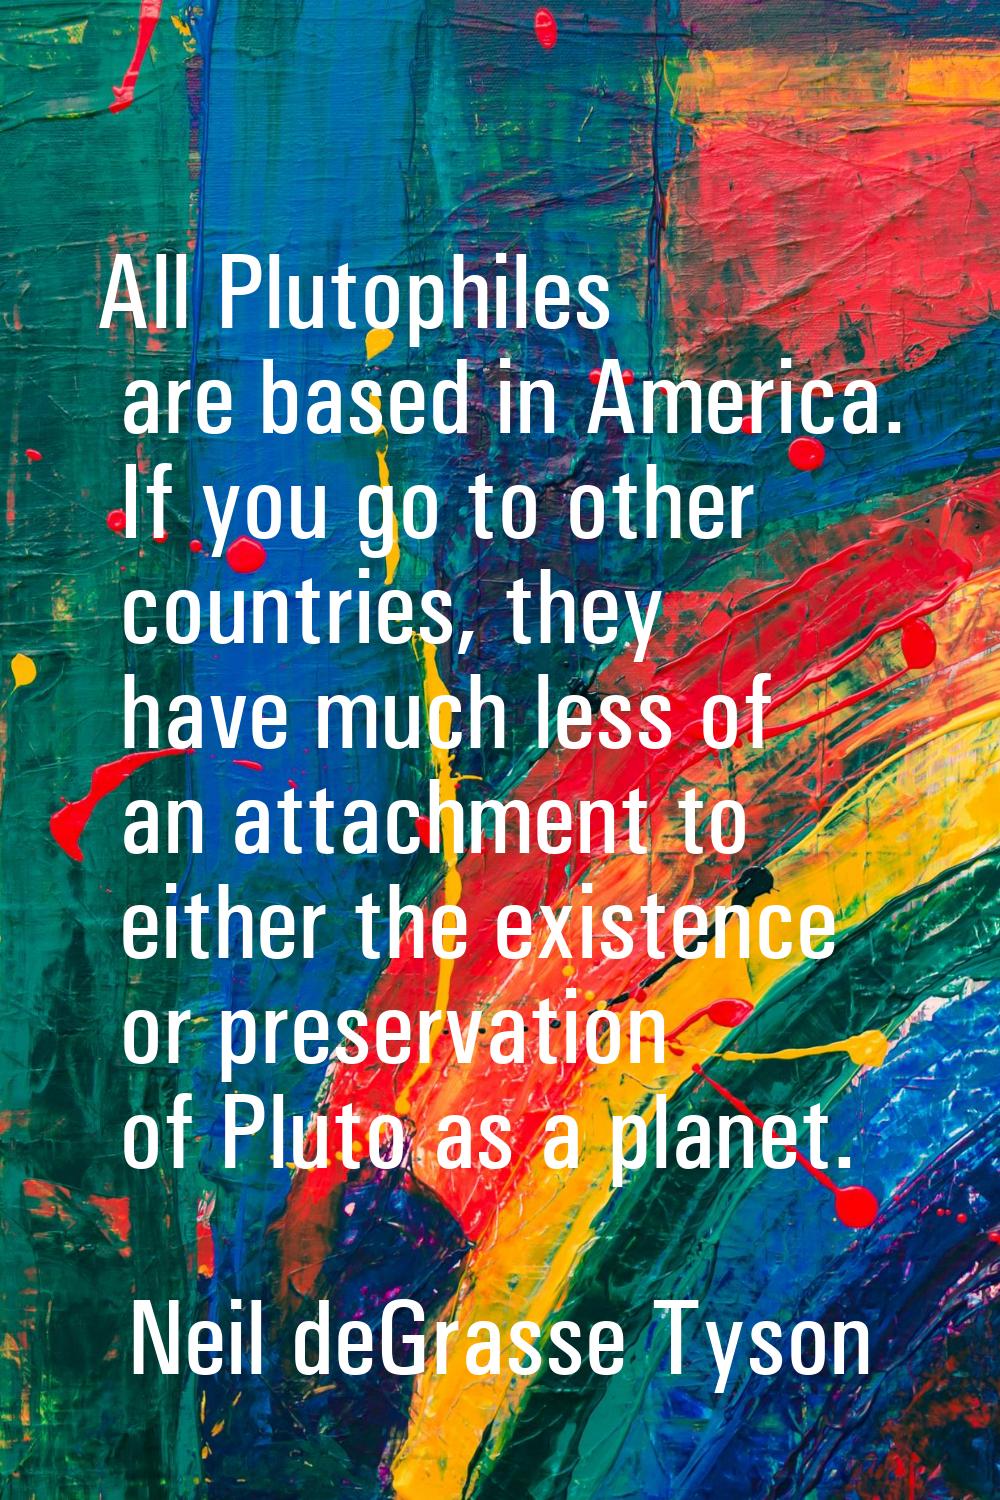 All Plutophiles are based in America. If you go to other countries, they have much less of an attac